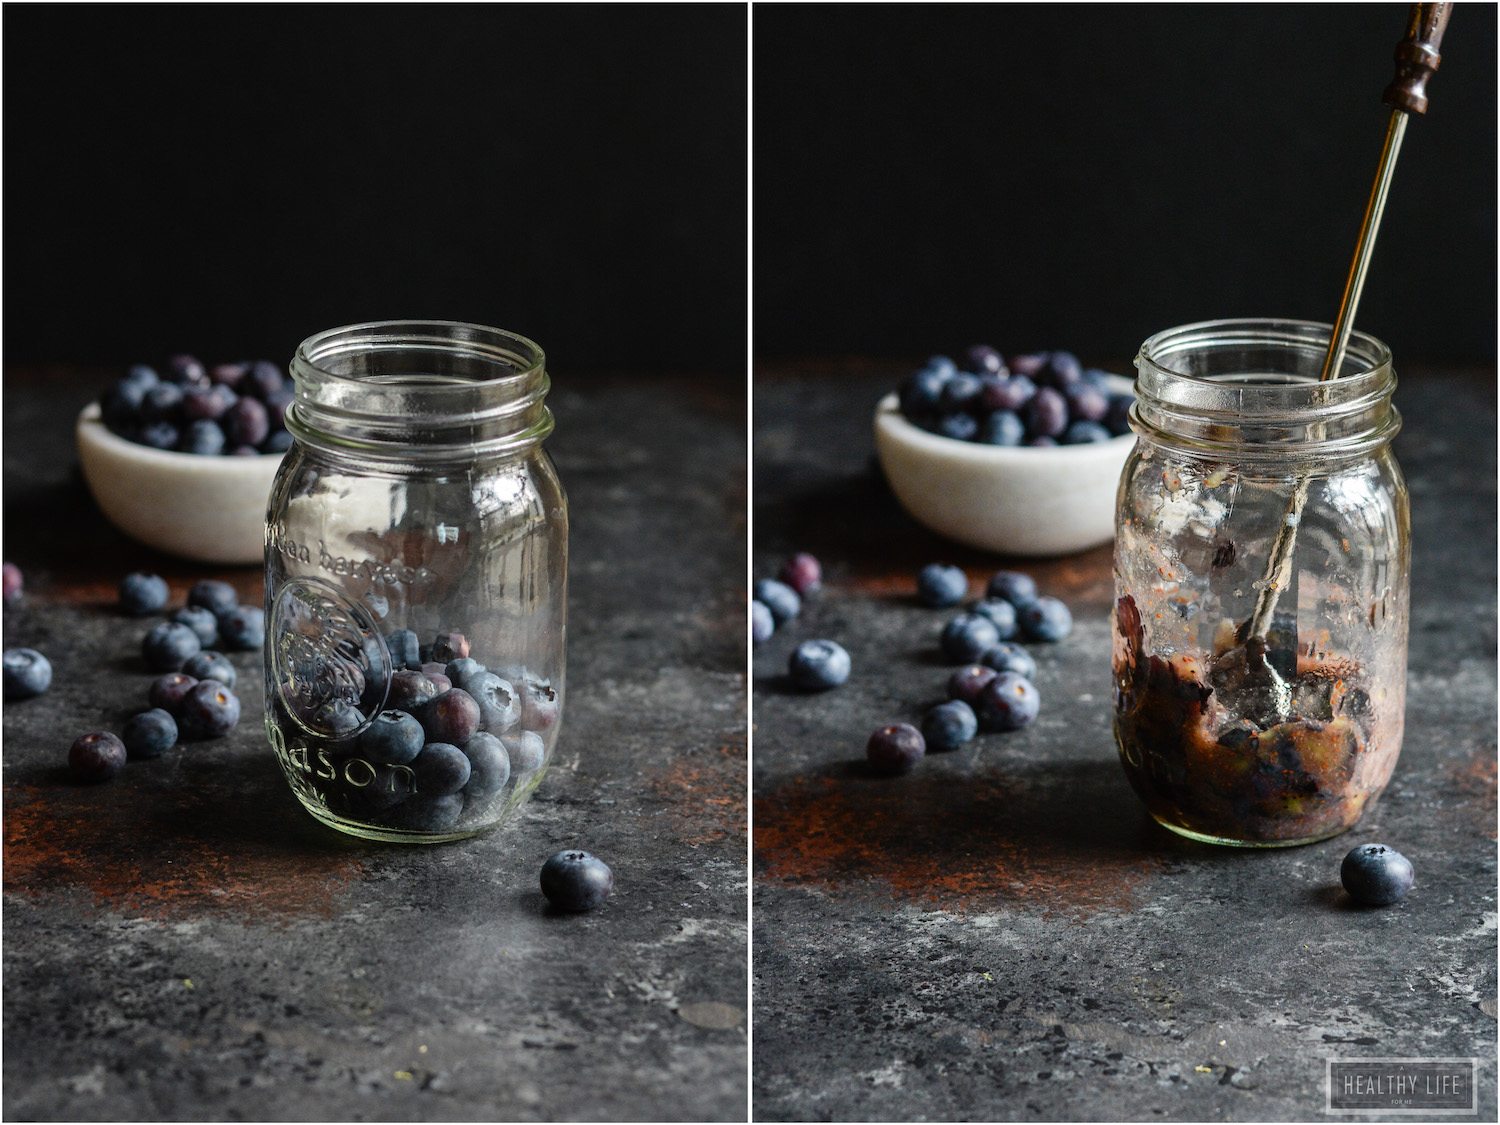 Adding the blueberries to the jar in the left. Crushing the blueberries on the right.